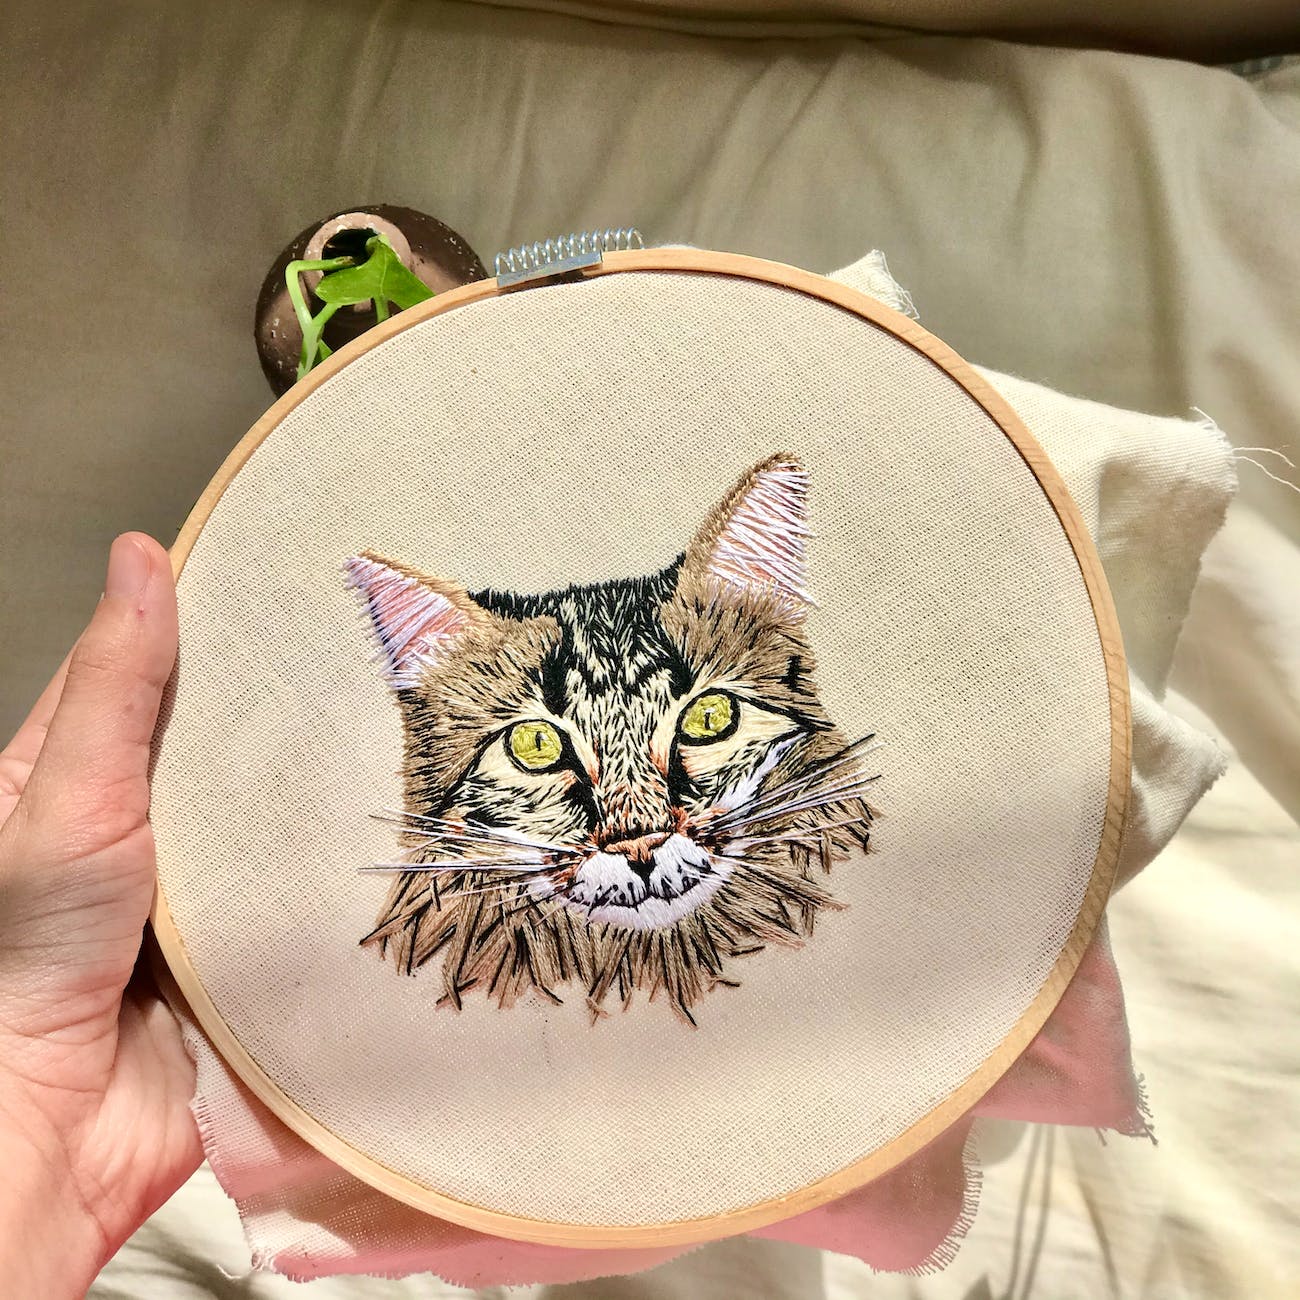 Creating Stunning Embroidery Art: Inspiration and Ideas